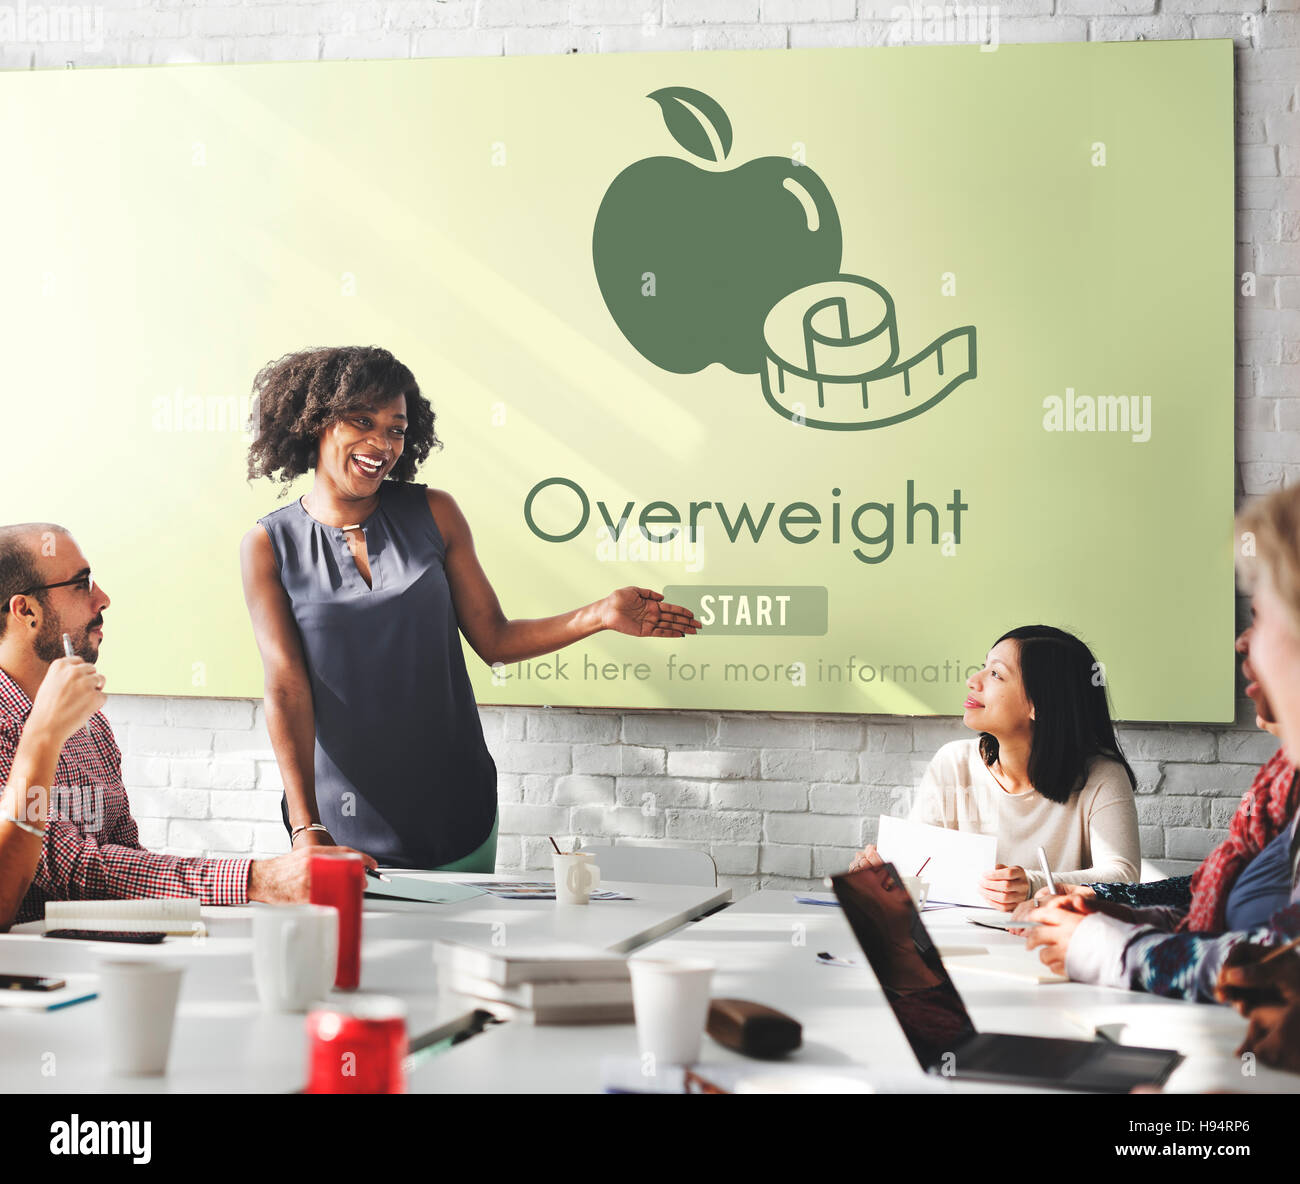 Overweight Diet Eating Disorder Unhealthy Diabetes Fat Concept Stock Photo